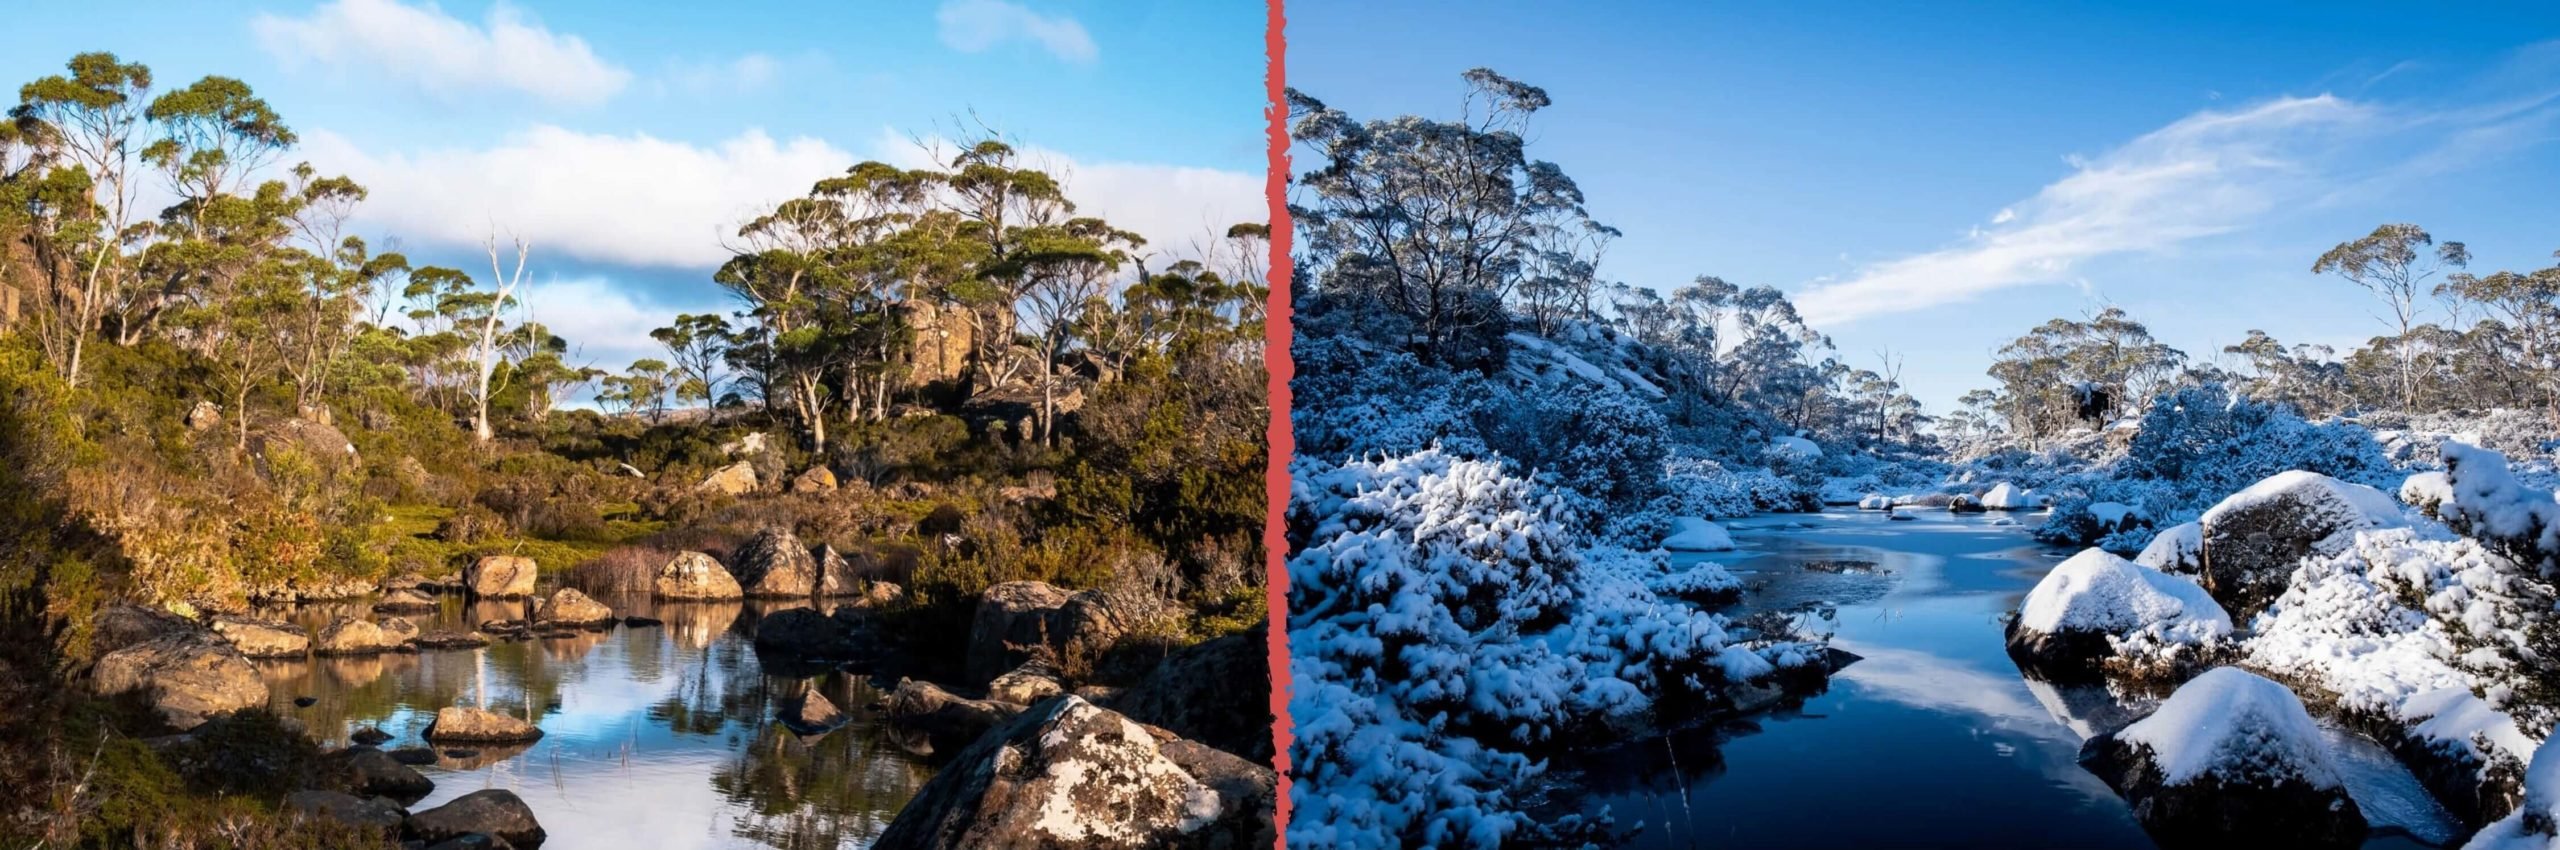 A side-by-side comparison photo of the summer and winter seasons in The Walls of Jerusalem National Park